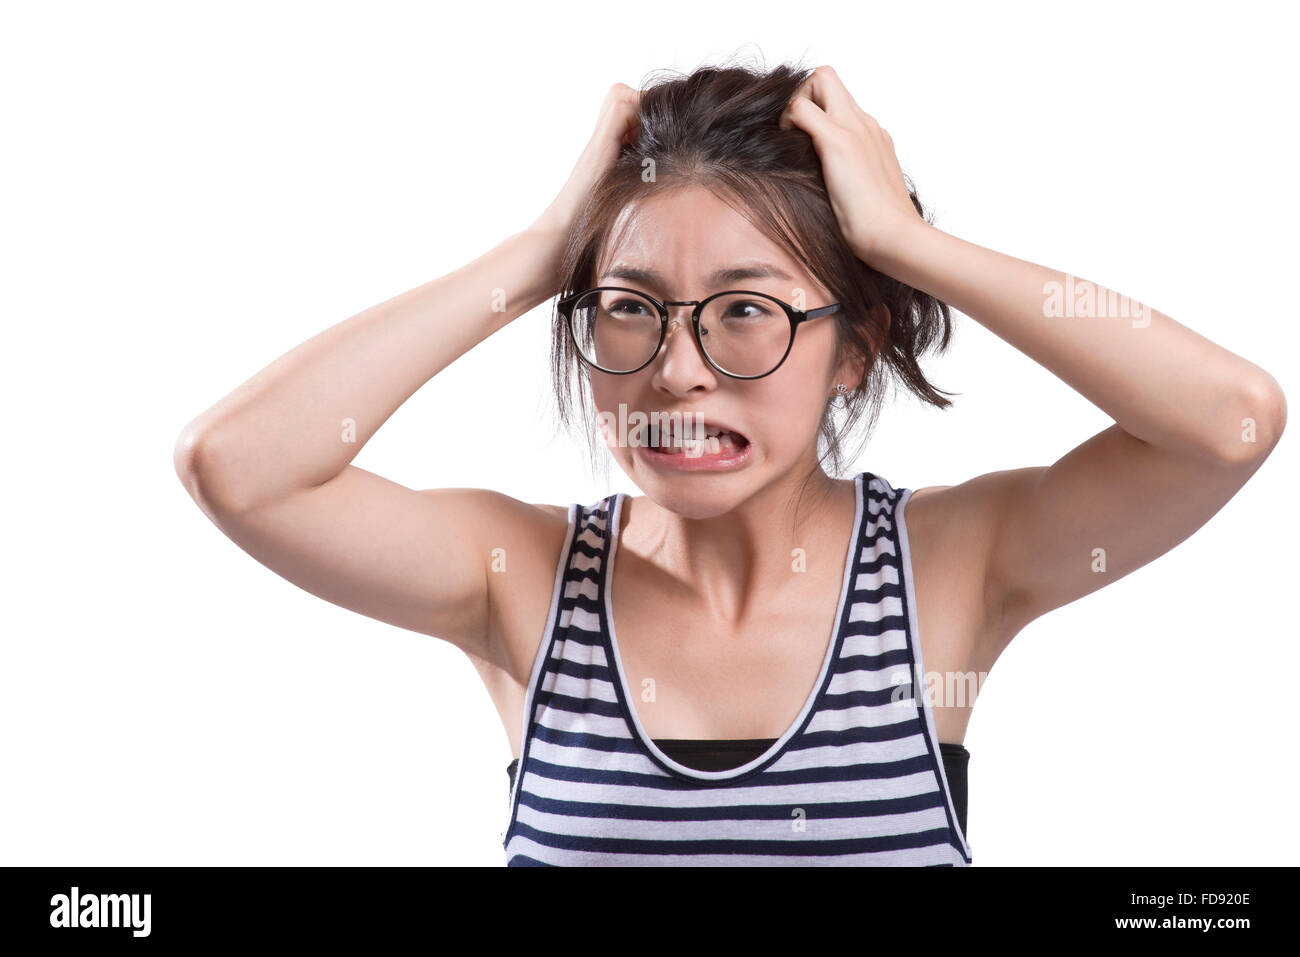 Portrait of young woman horrified Stock Photo